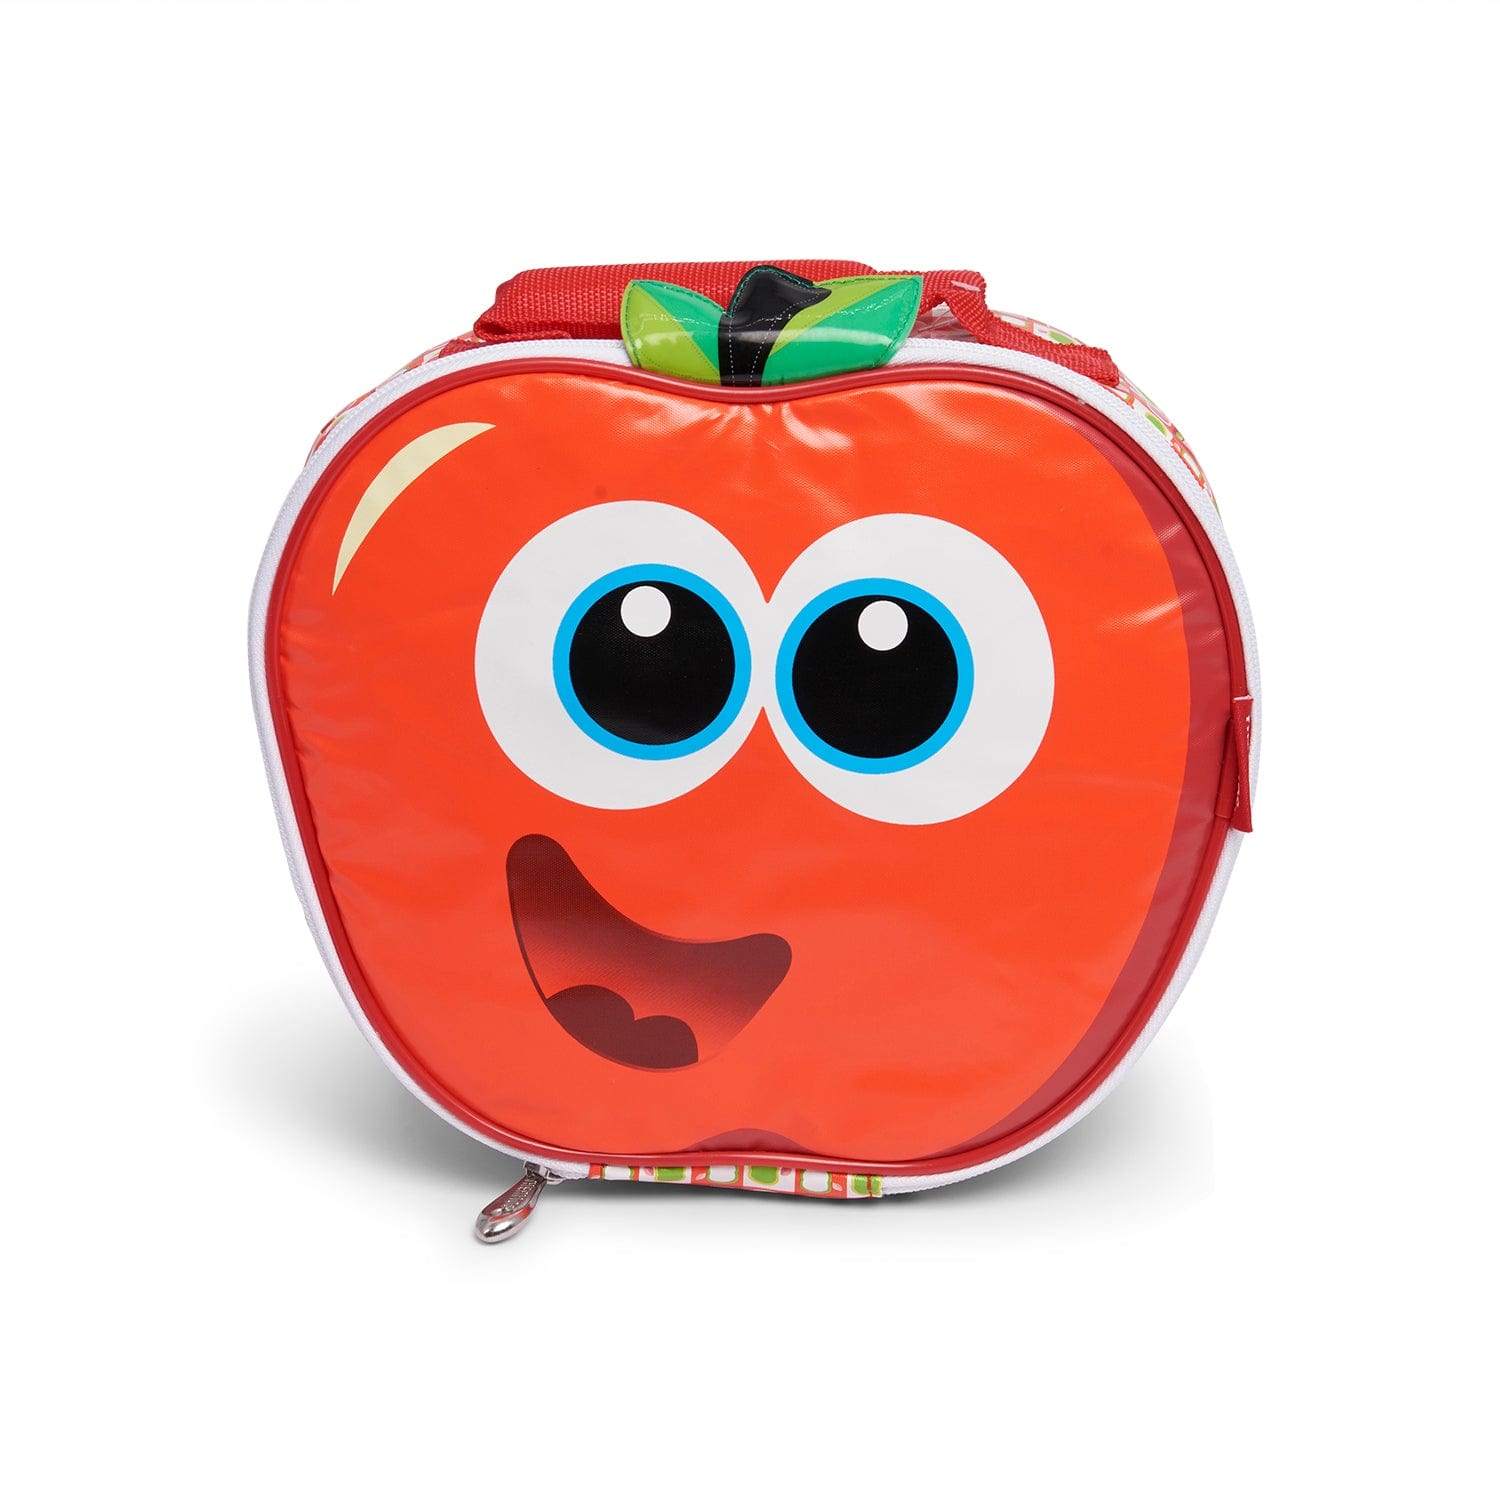 Thermos International THERMOS FRUIT NOVELTY APPLE